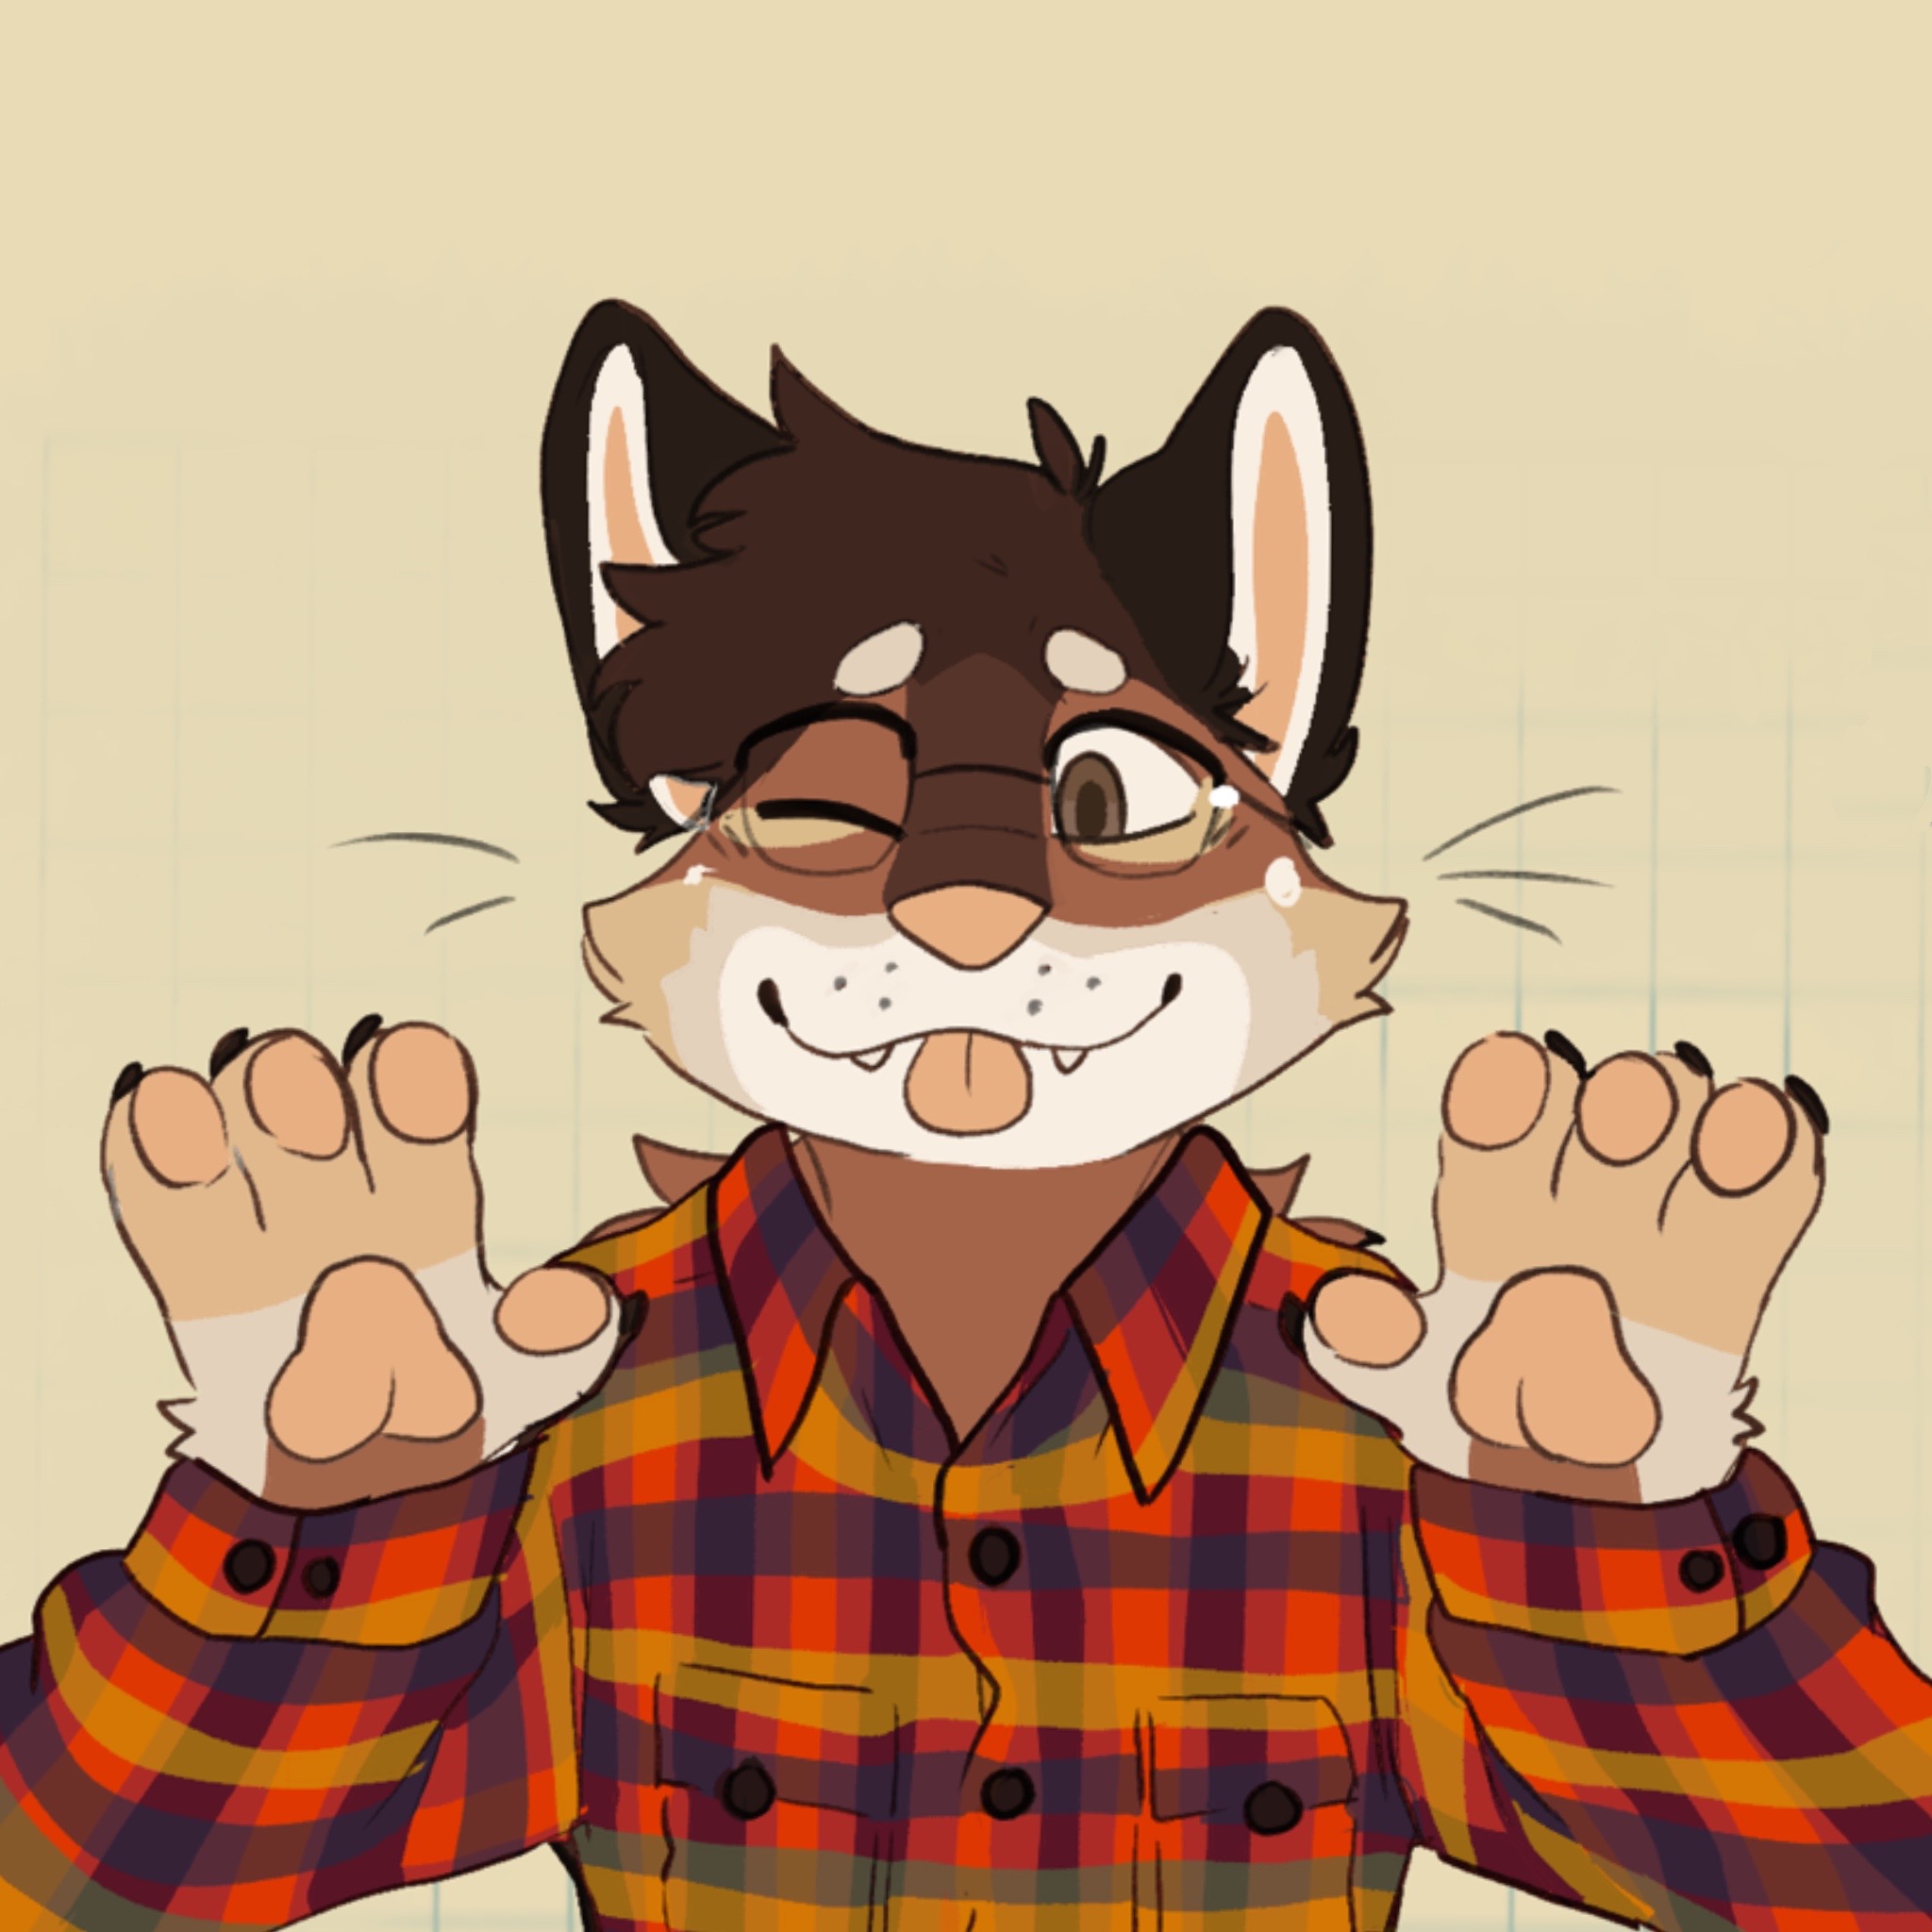 Drawing of a Shiba Inu with paws up, wearing large black glasses and a red flannel